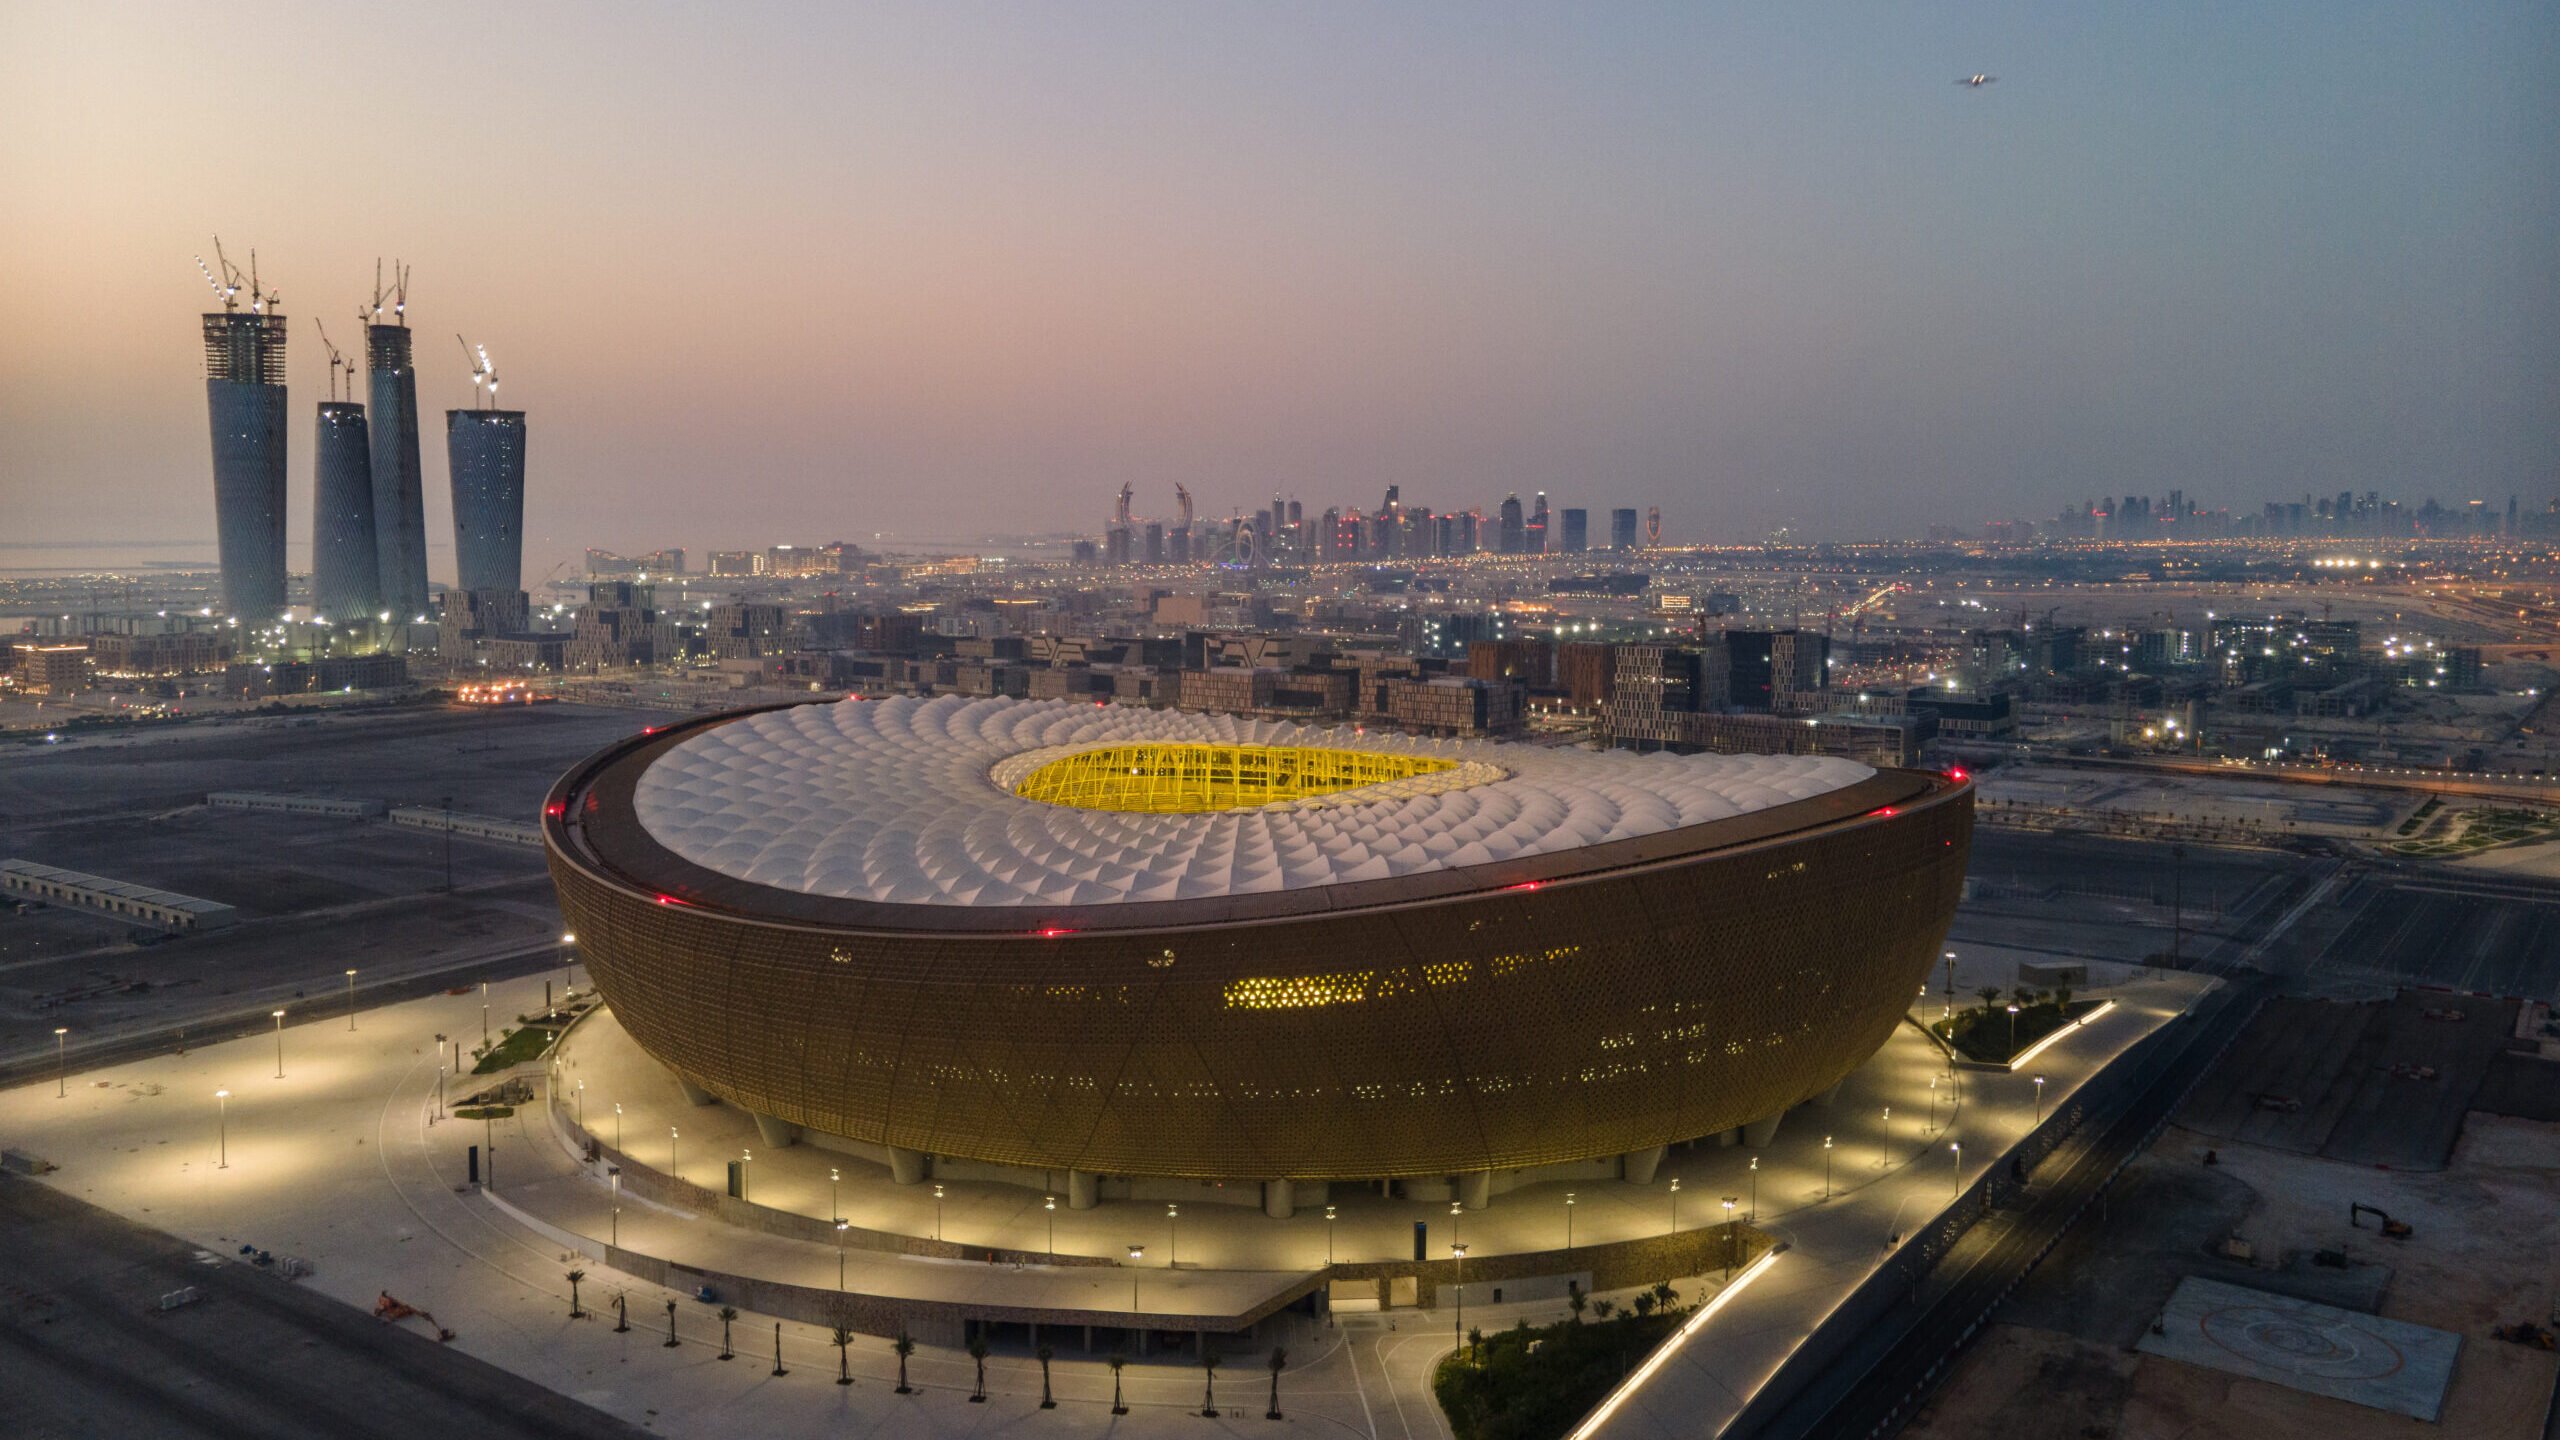 Aerial view of the FIFA World Cup Qatar 2022 venue